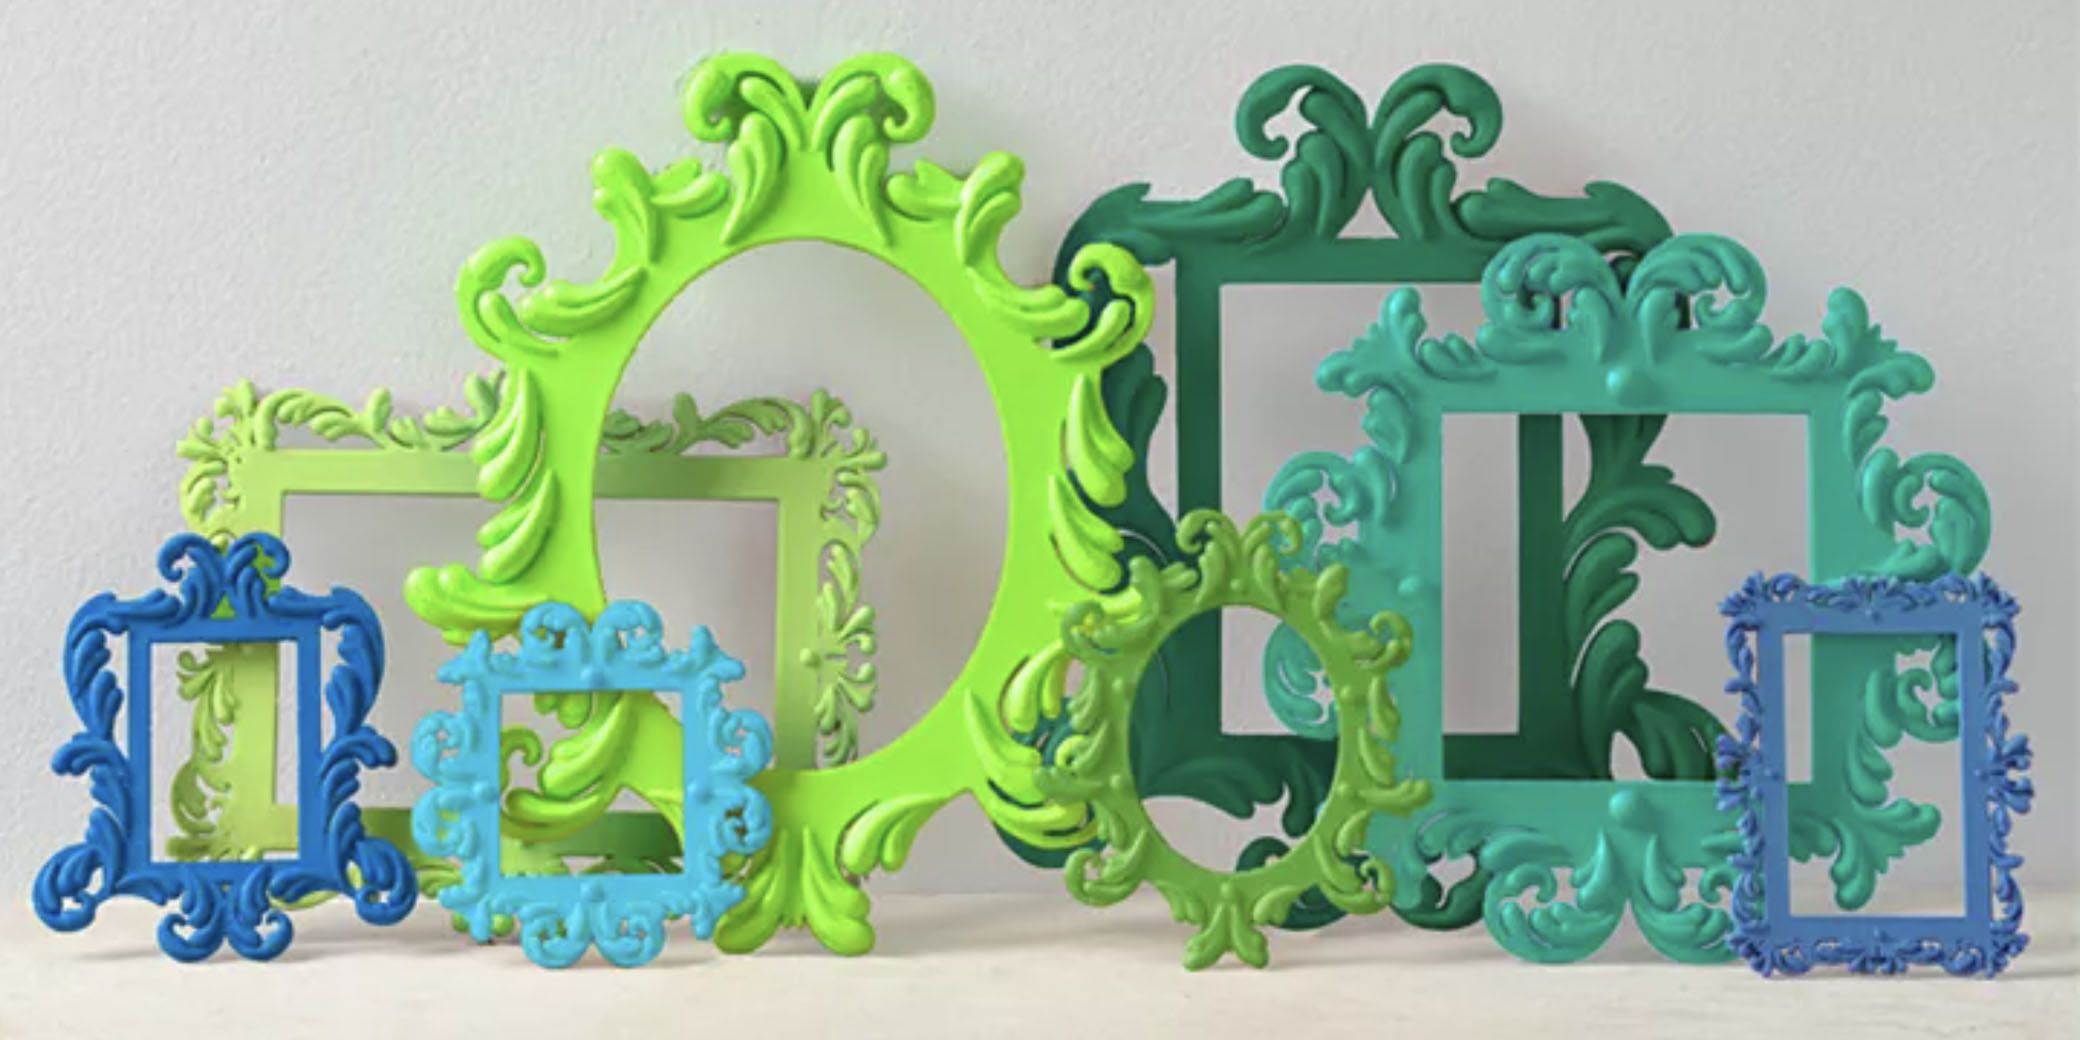 Here is a selection of the best 3D printable STL files for 3D printer of beautiful wall frames to decorate your home